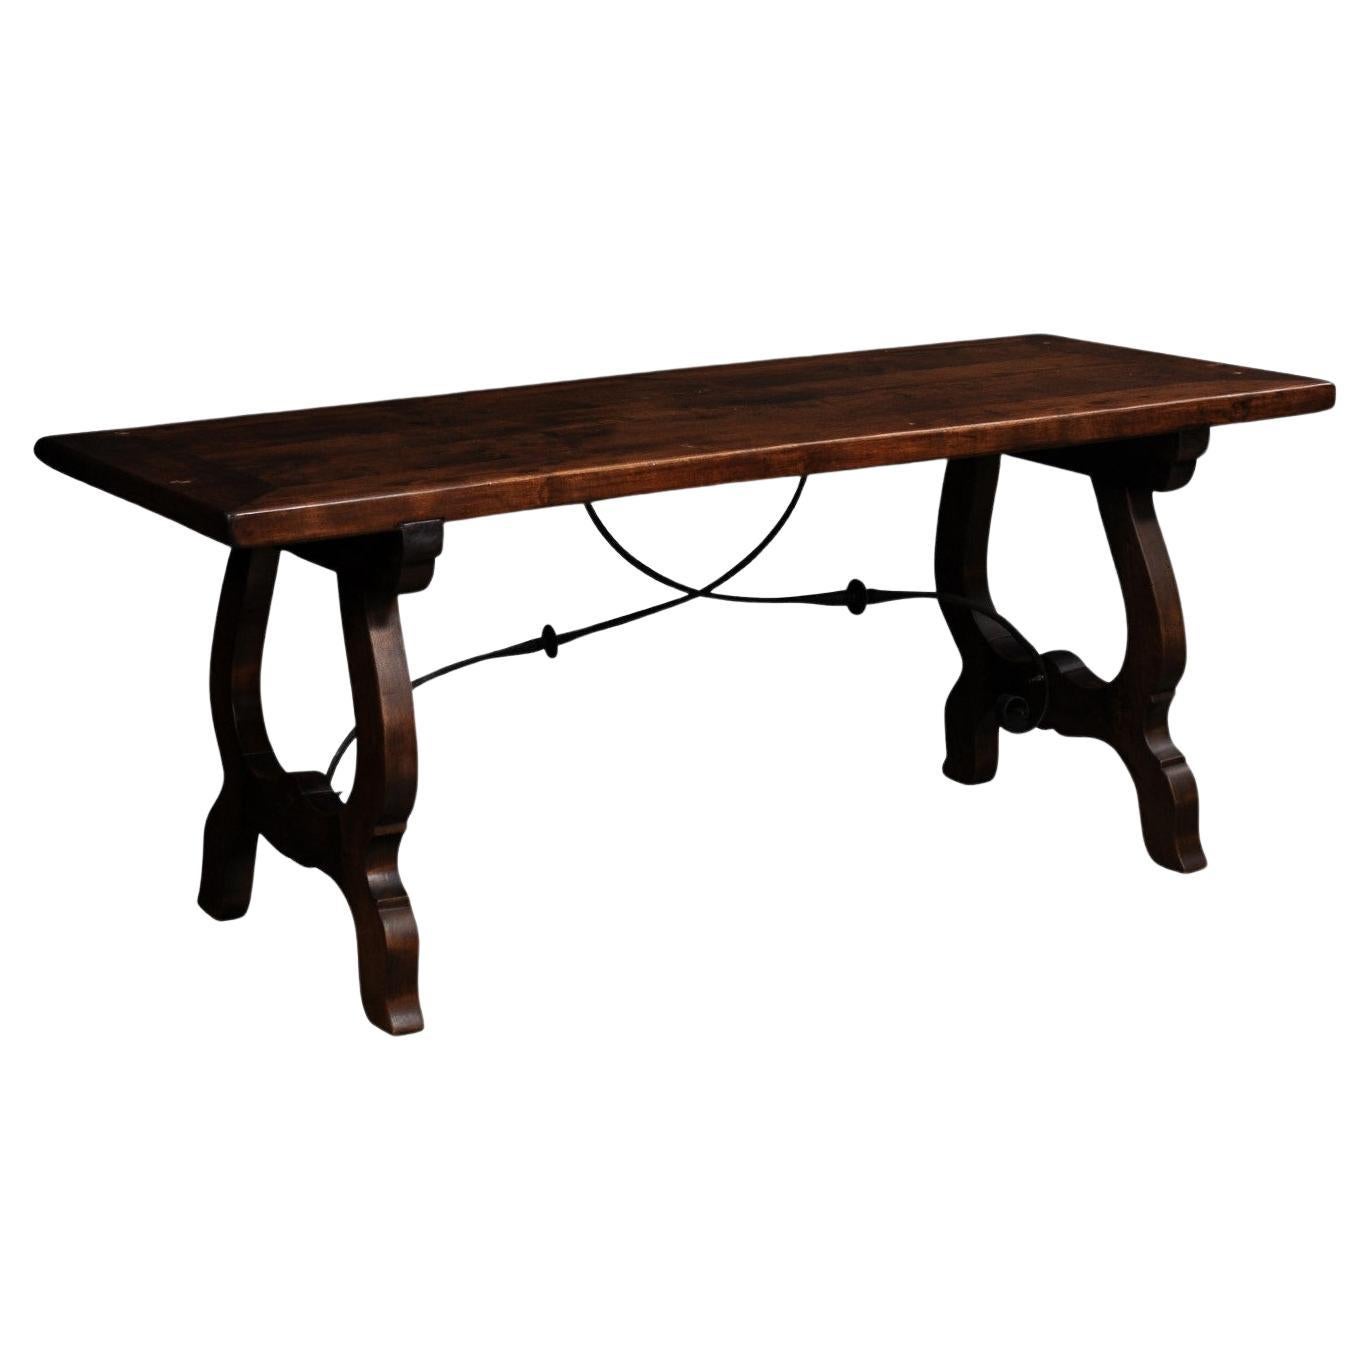 Spanish Baroque Style Fratino Table with Lyre Shaped Base and Iron Stretcher For Sale